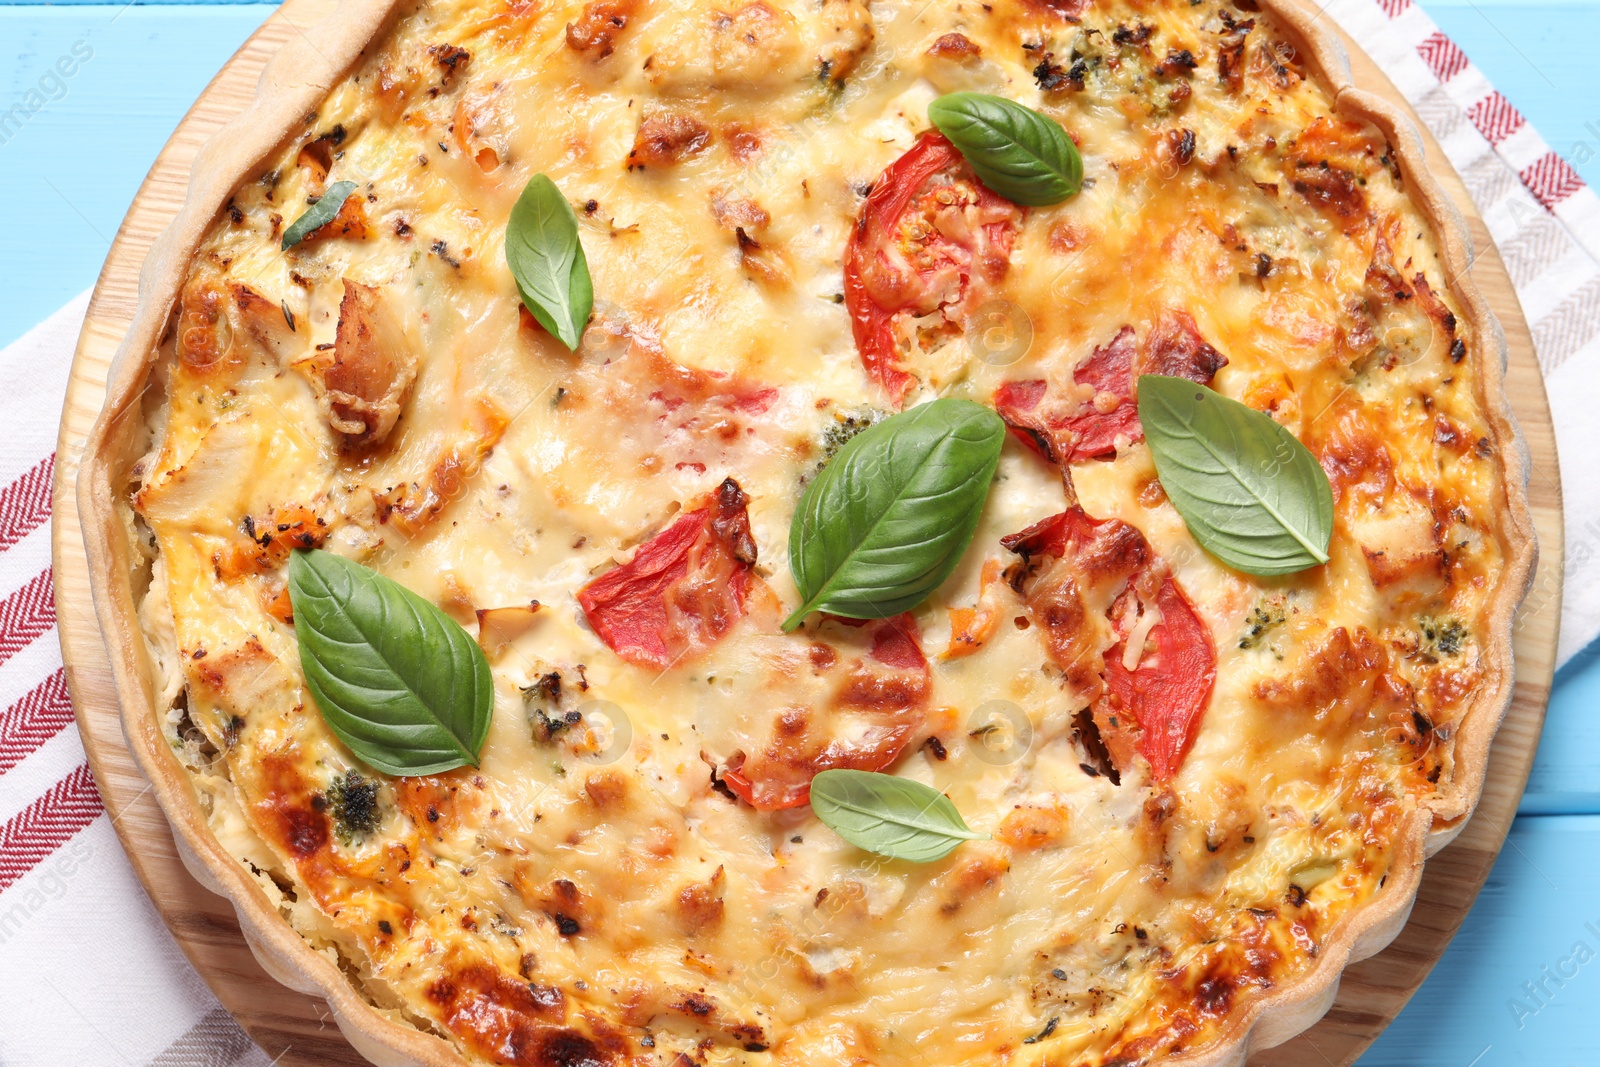 Photo of Tasty quiche with tomatoes, basil and cheese served on light blue wooden table, top view